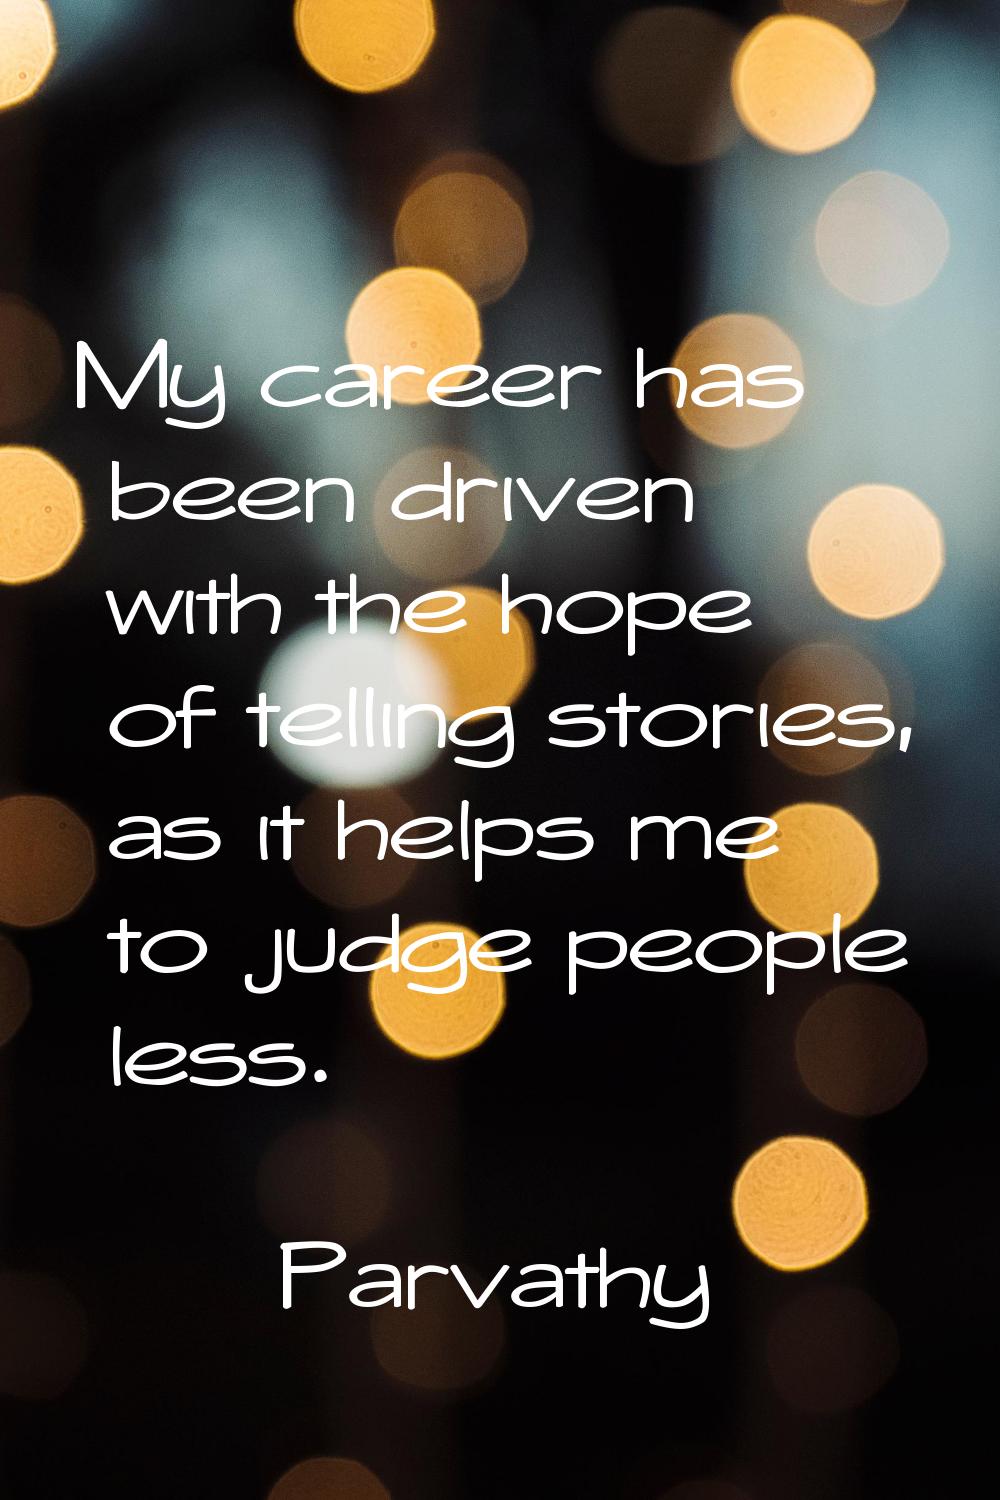 My career has been driven with the hope of telling stories, as it helps me to judge people less.